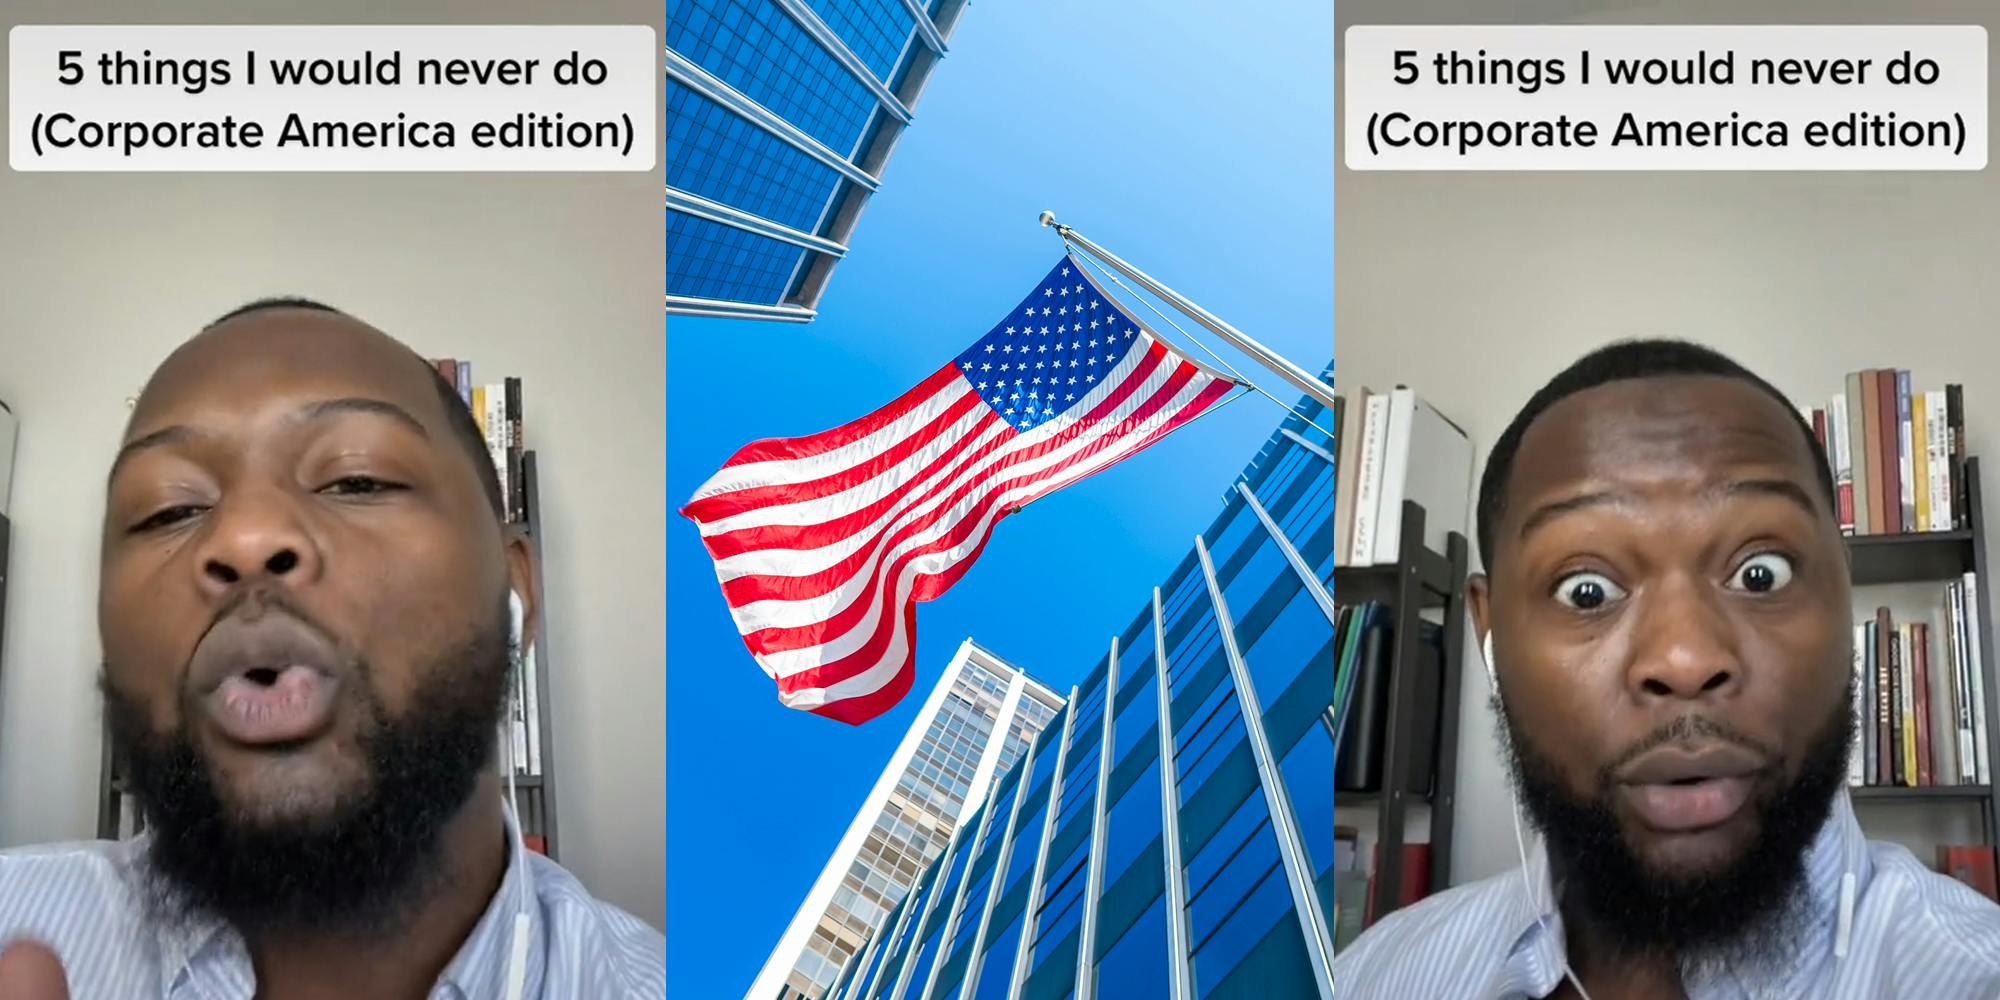 man speaking inside finger up caption "5 things I would never do (Corporate America edition)" (l) American flag in city (corporate America concept) (c) man speaking inside finger up caption "5 things I would never do (Corporate America edition)" (r)